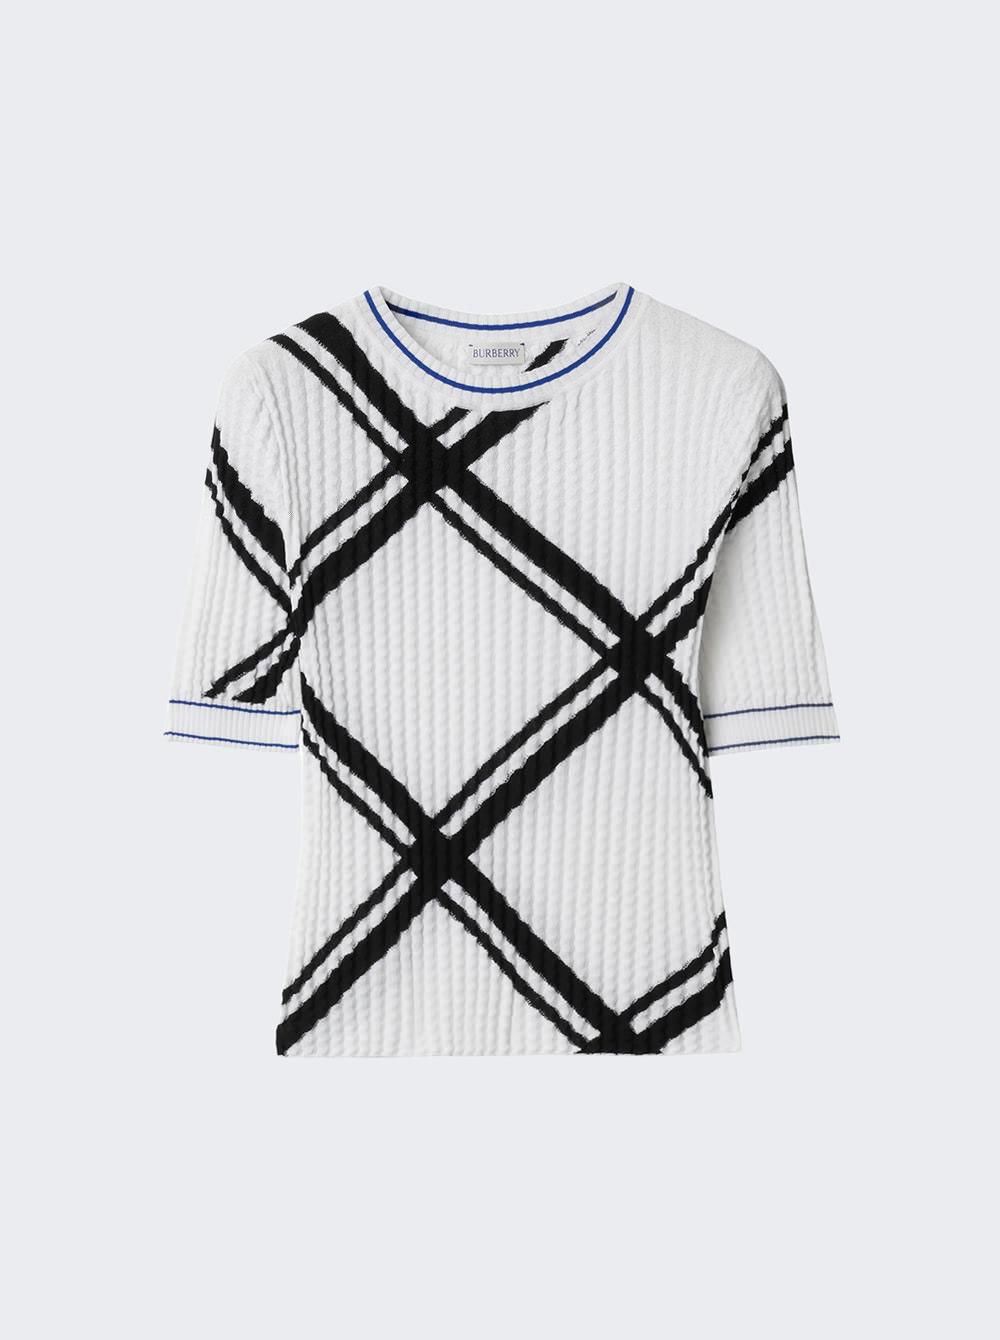 Check Cotton Top Black And White  | The Webster by BURBERRY